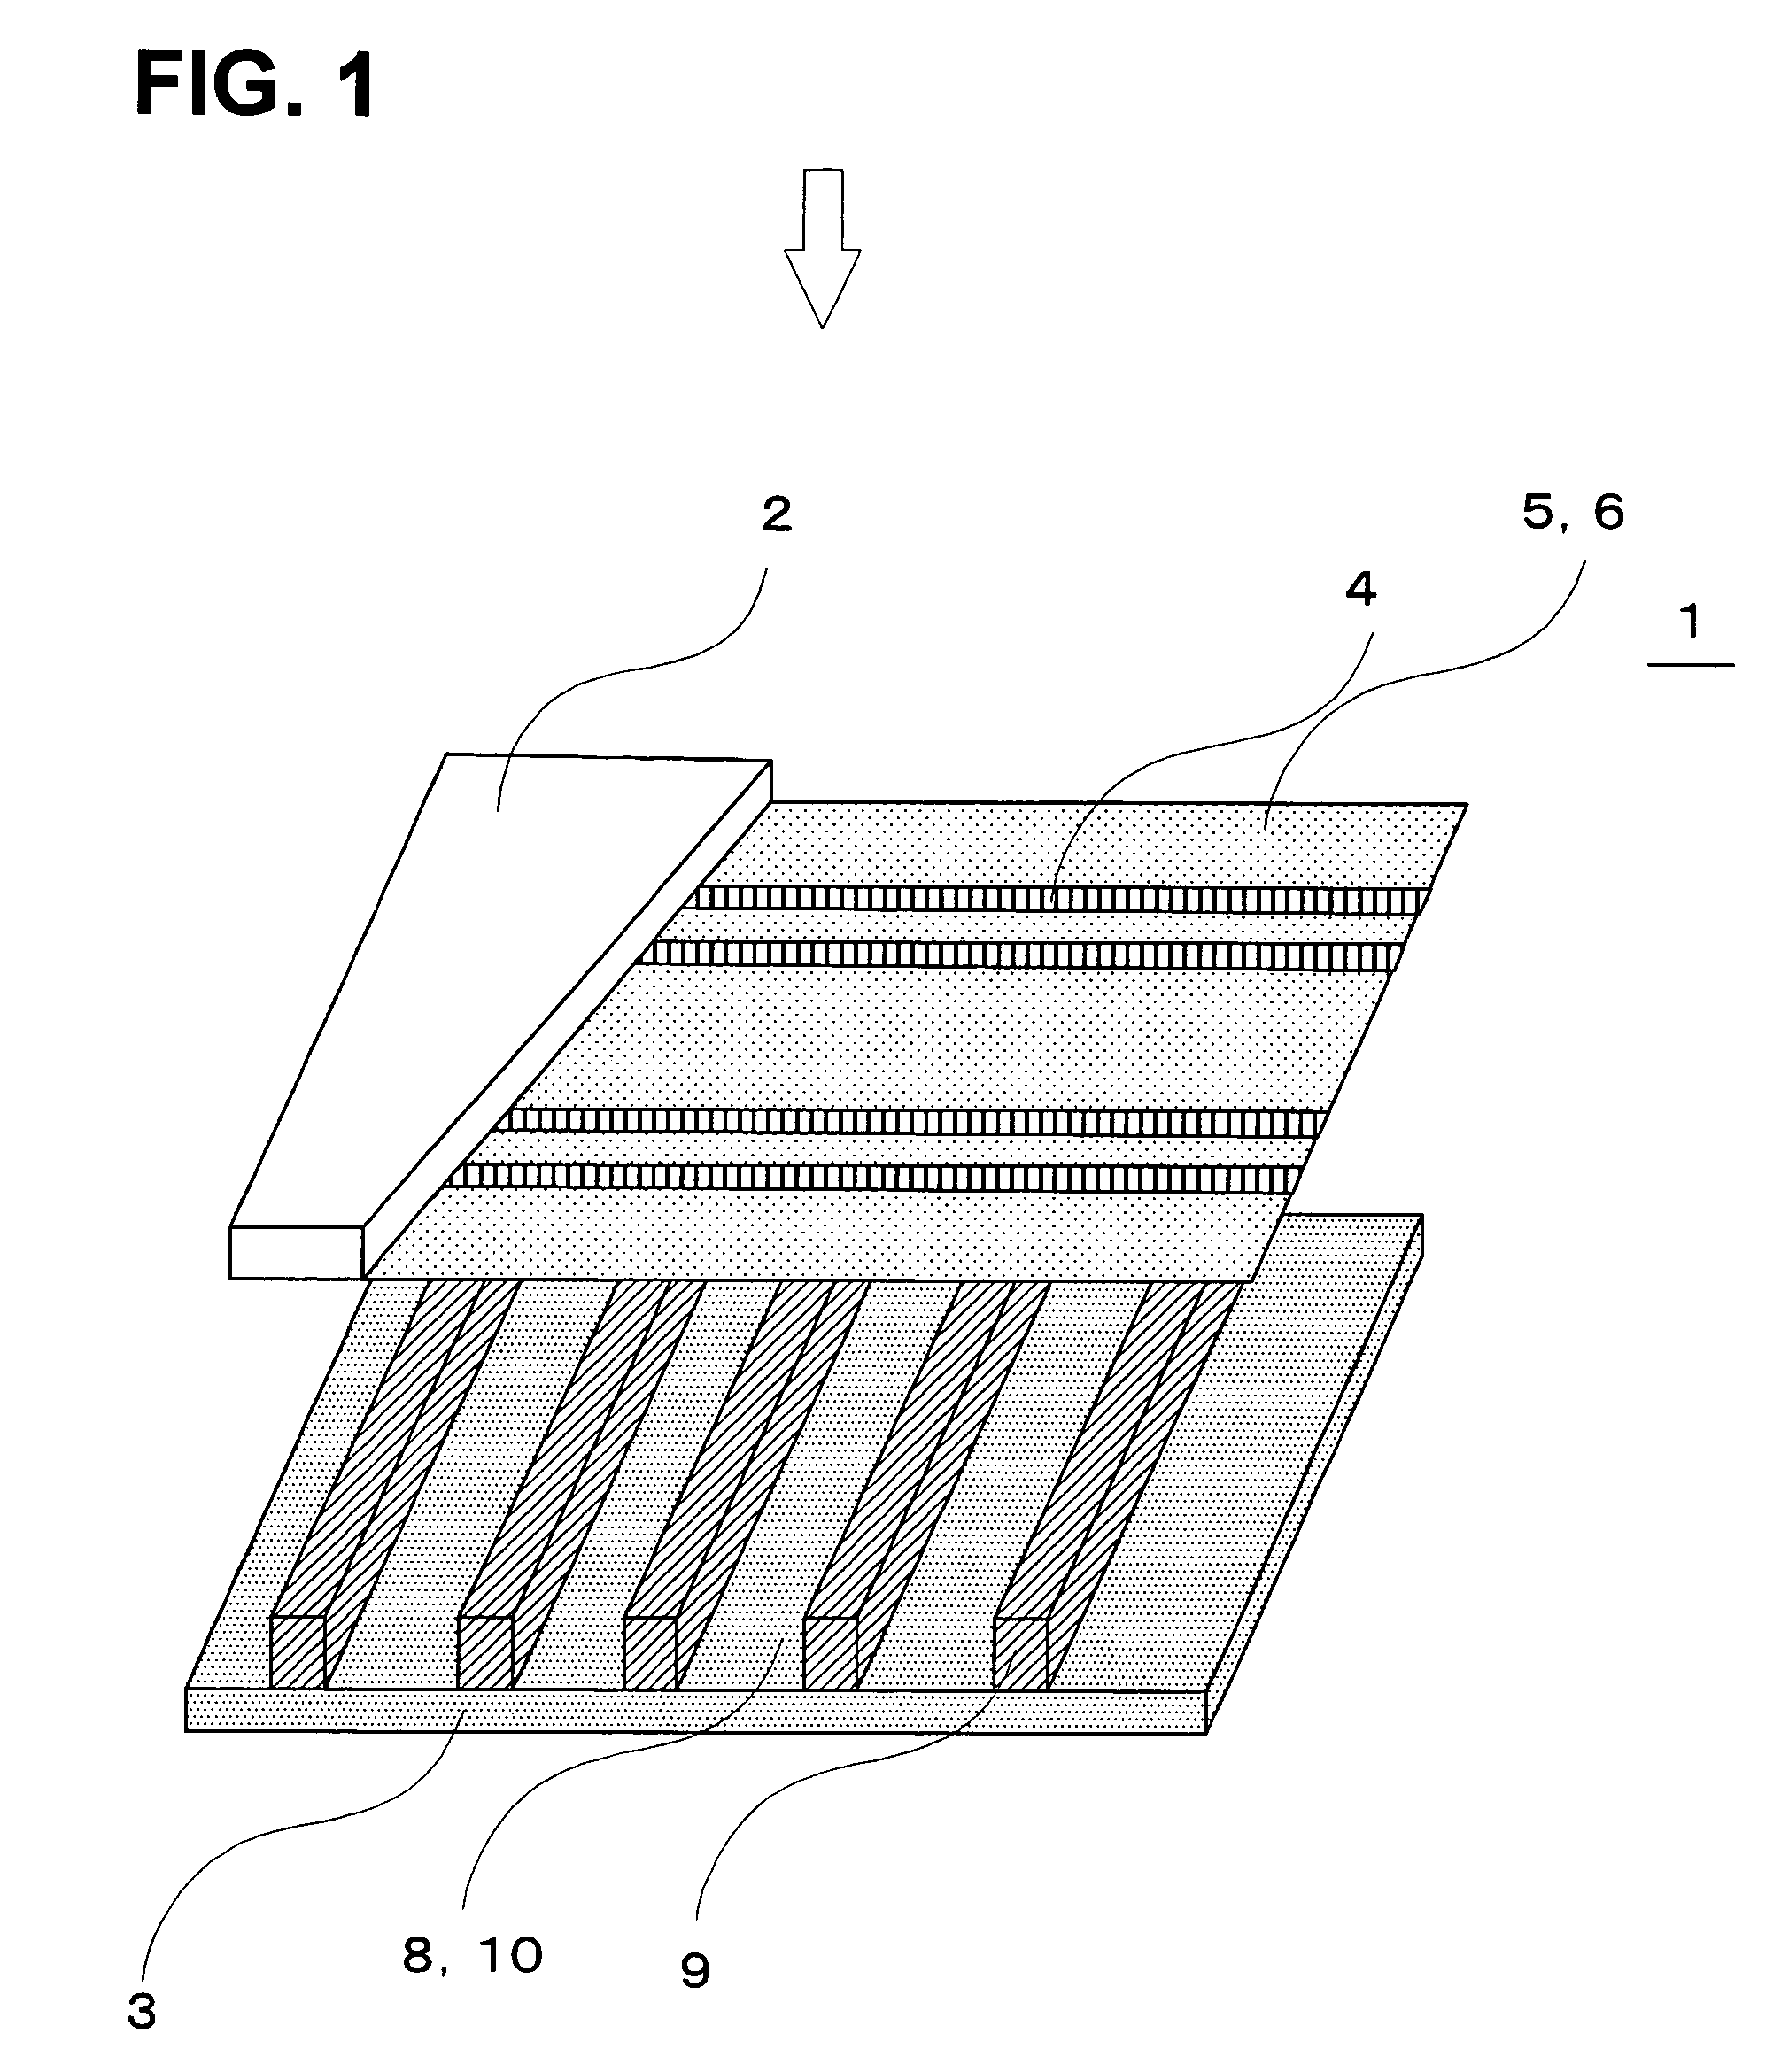 Molding material transfer method and substrate structure